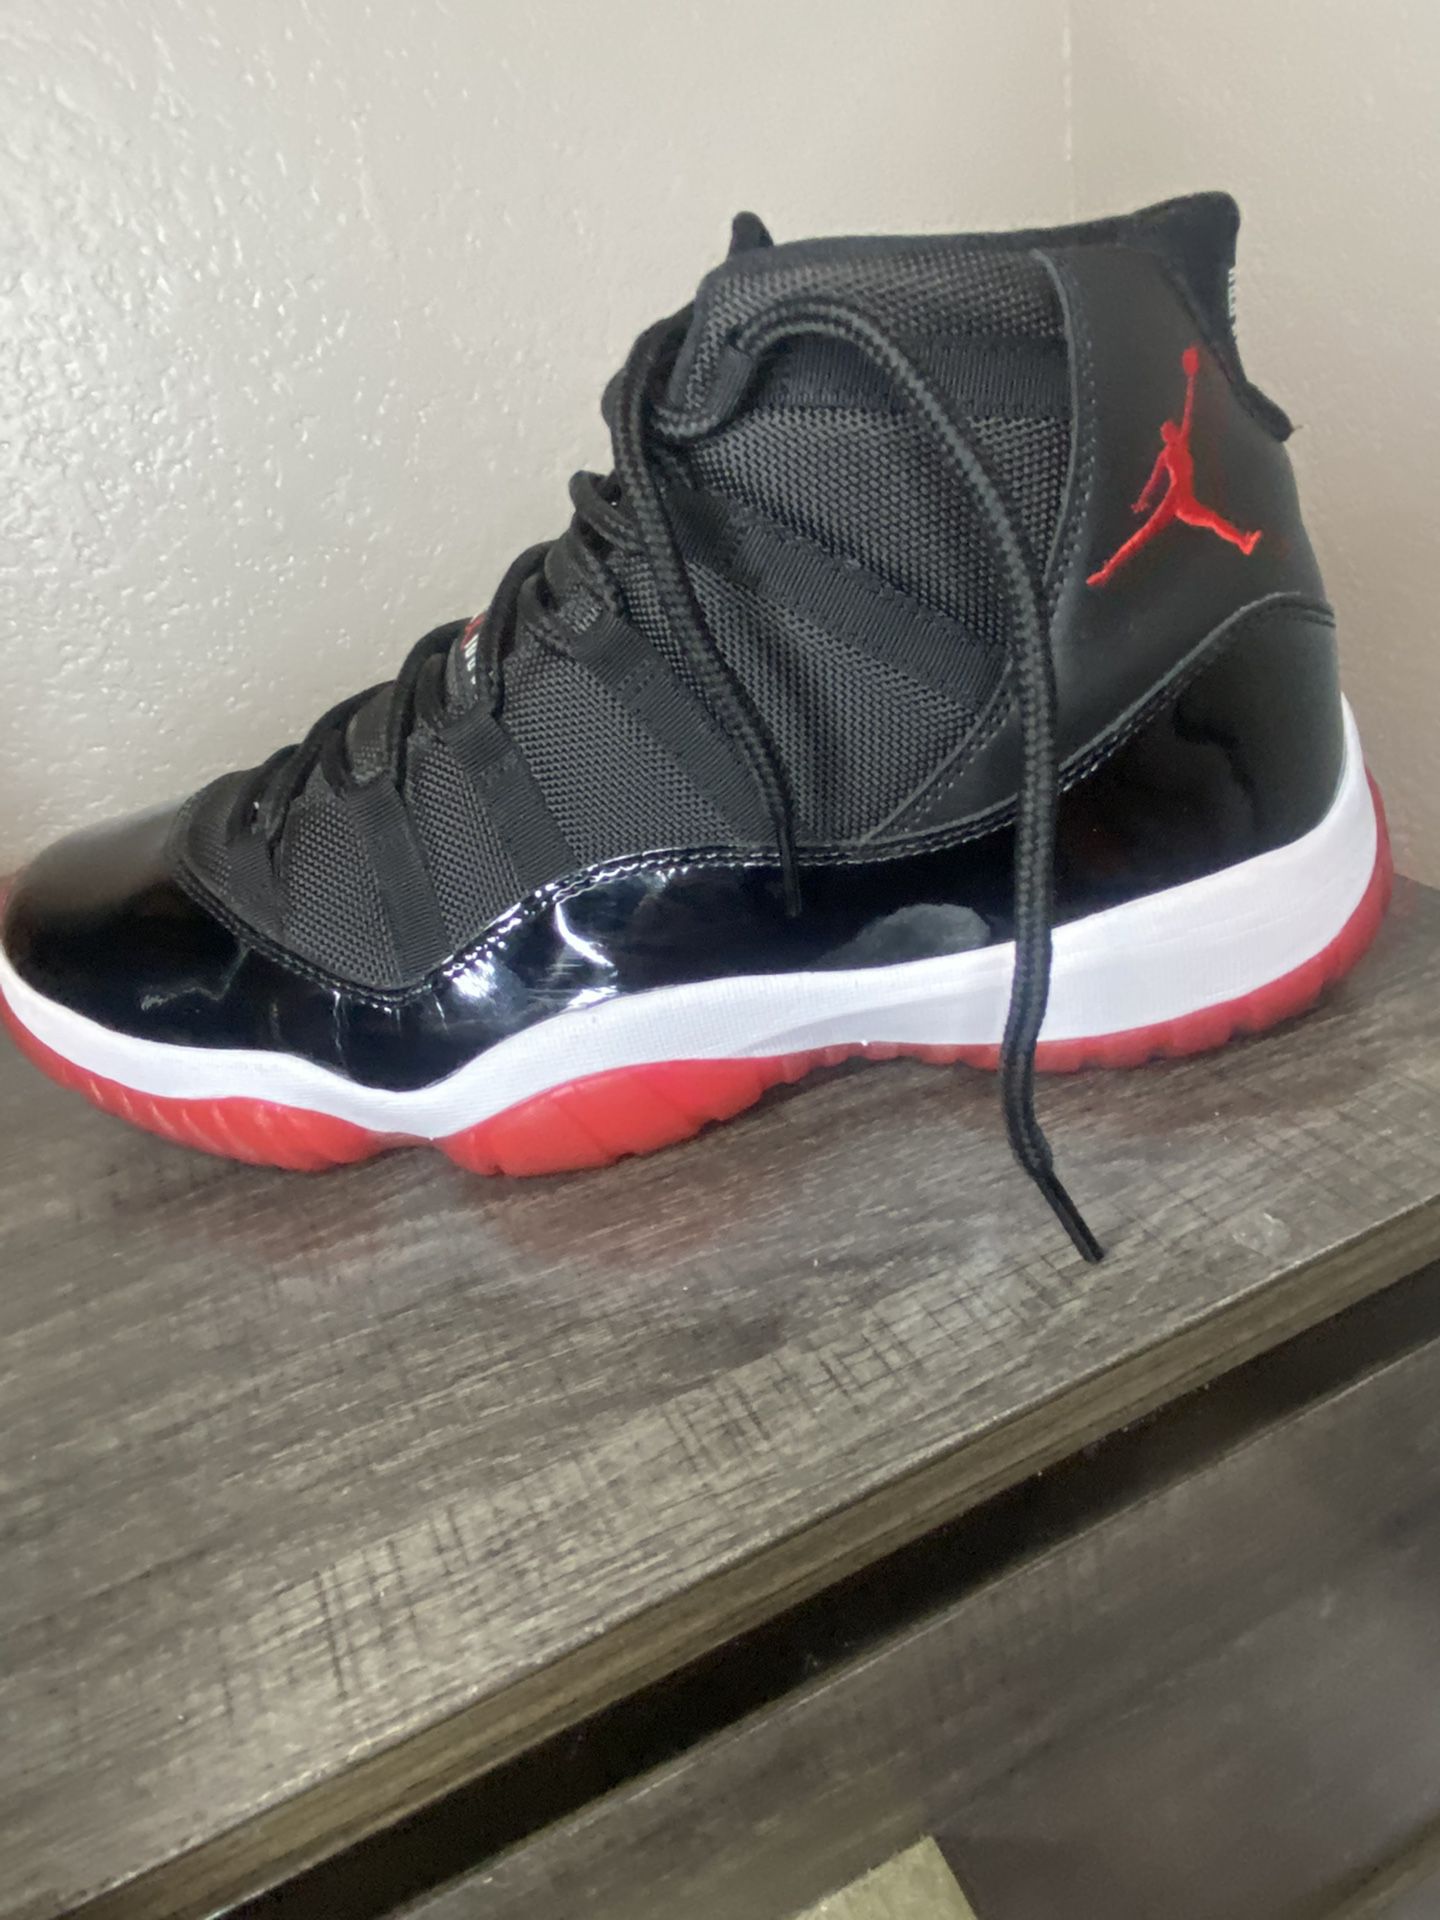 Jordan 11s Bred Size 12 (the light in Pics reflect and Make it Look Scuffed No Marks)